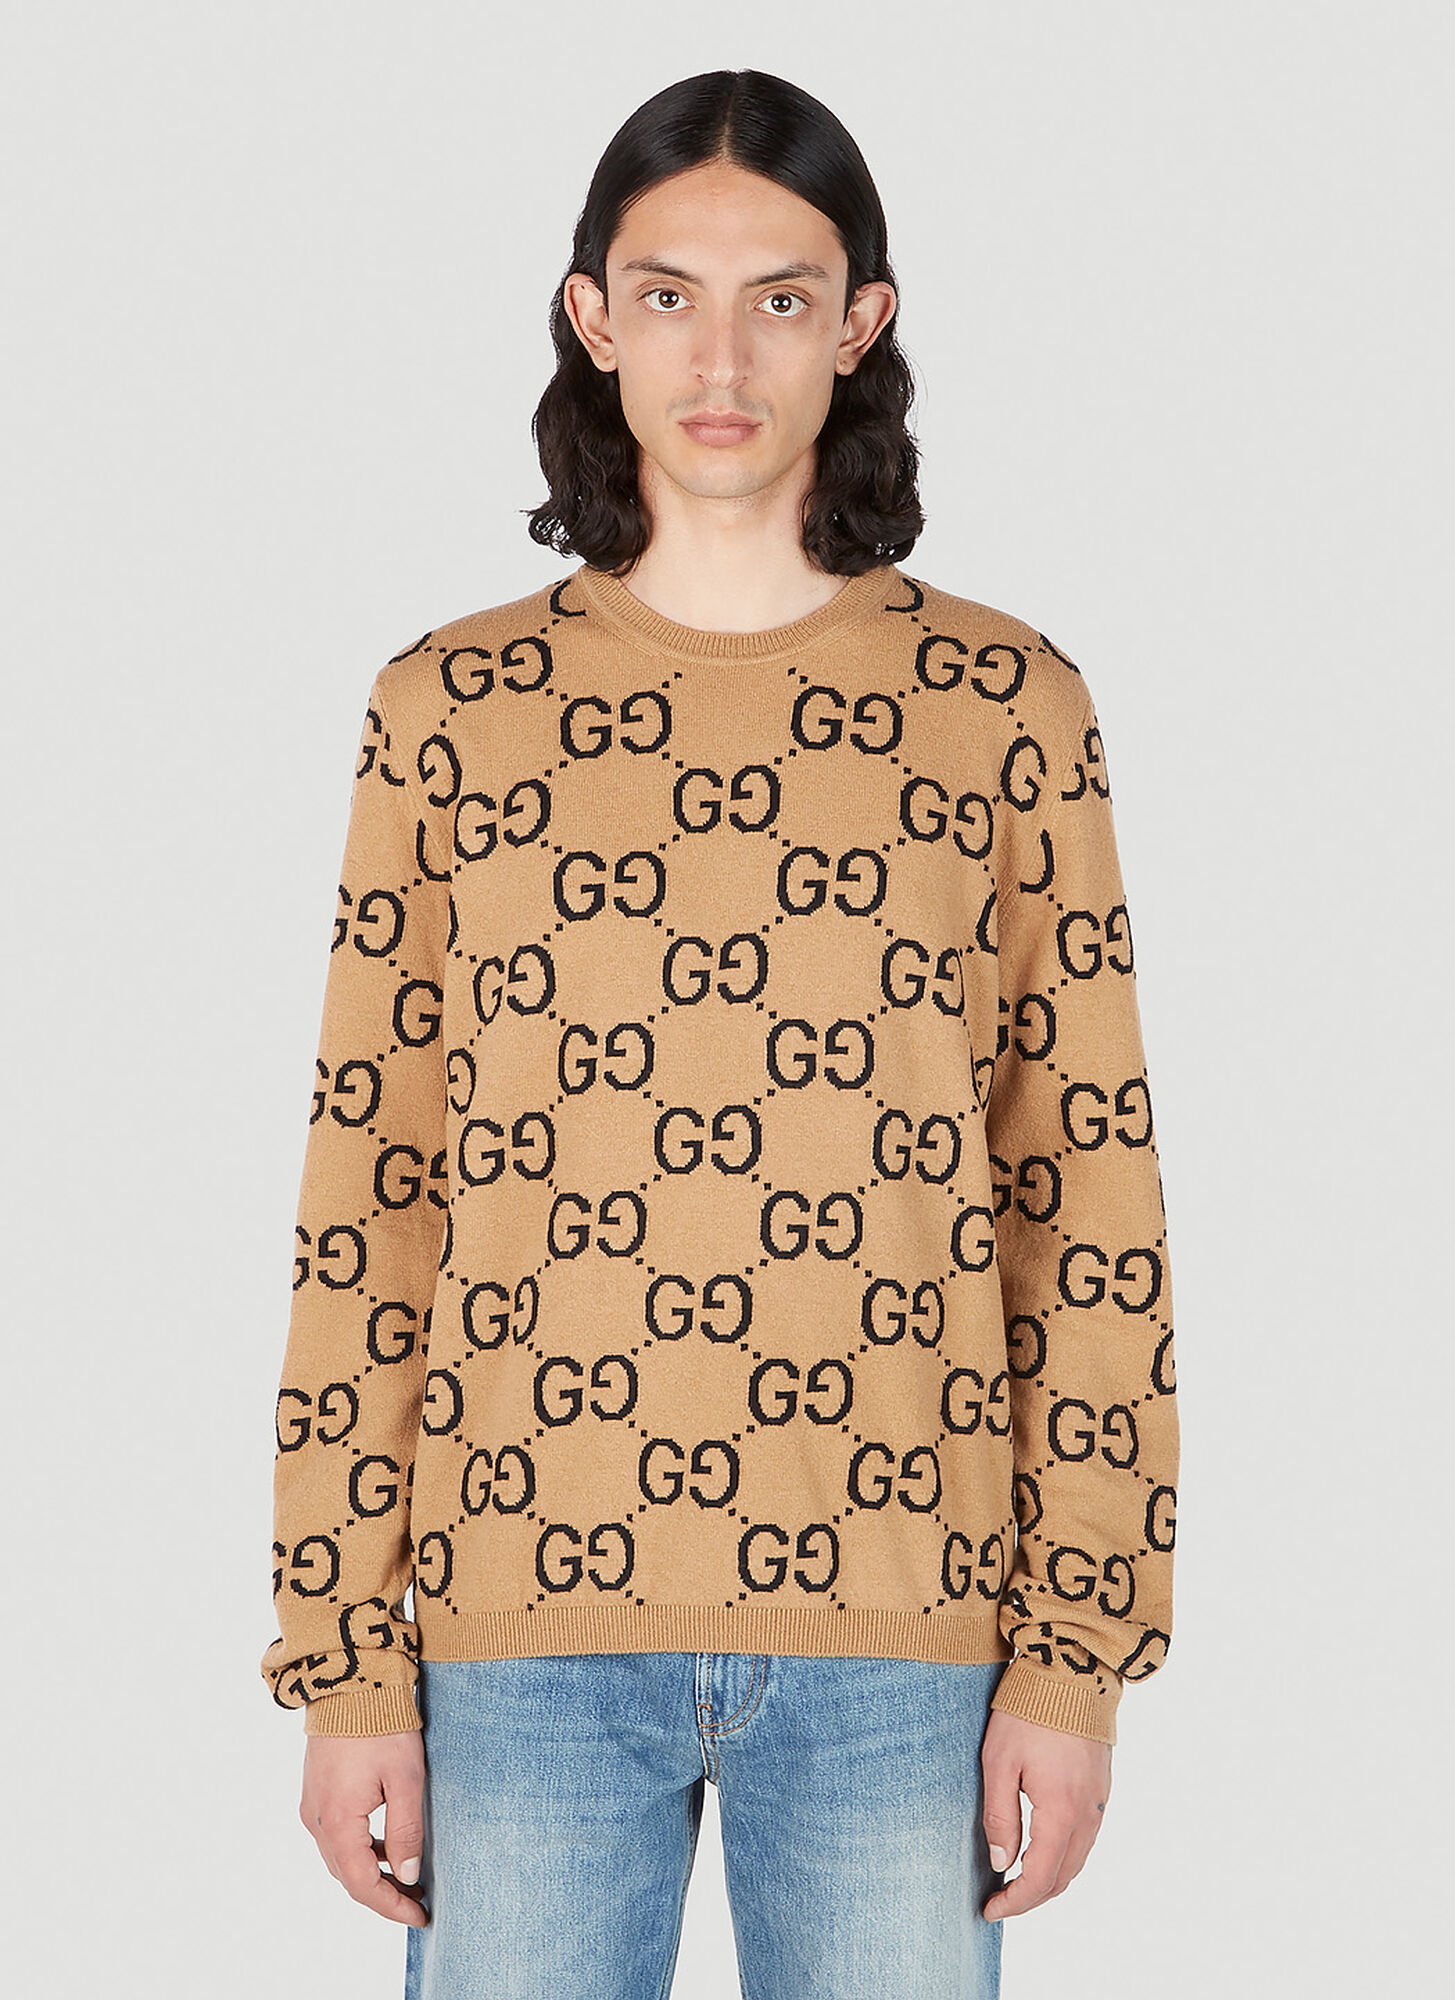 GG wool jacquard sweater in green and camel